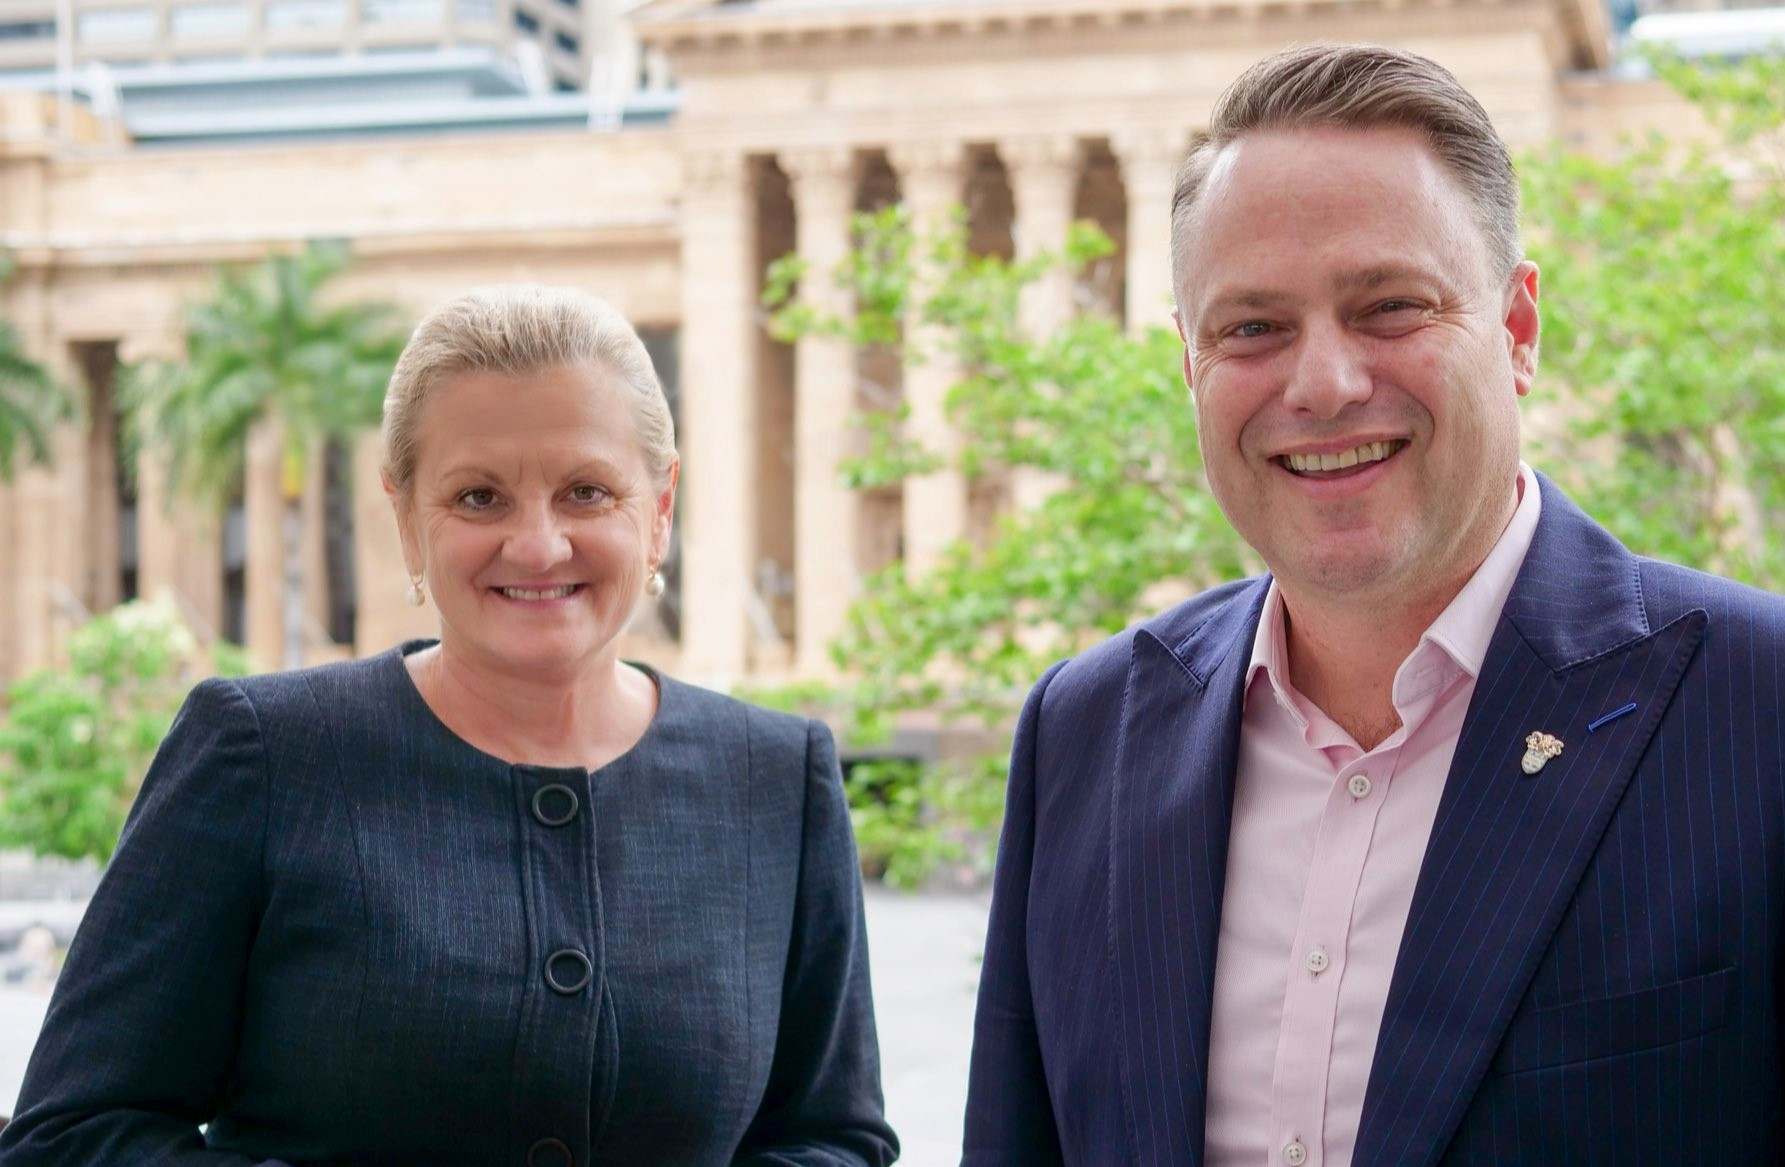 Karen Williams, left, had been nominated for the Brisbane 2032 Board by Adrian Schrinner, but resigned ©Twitter/bne_lordmayor